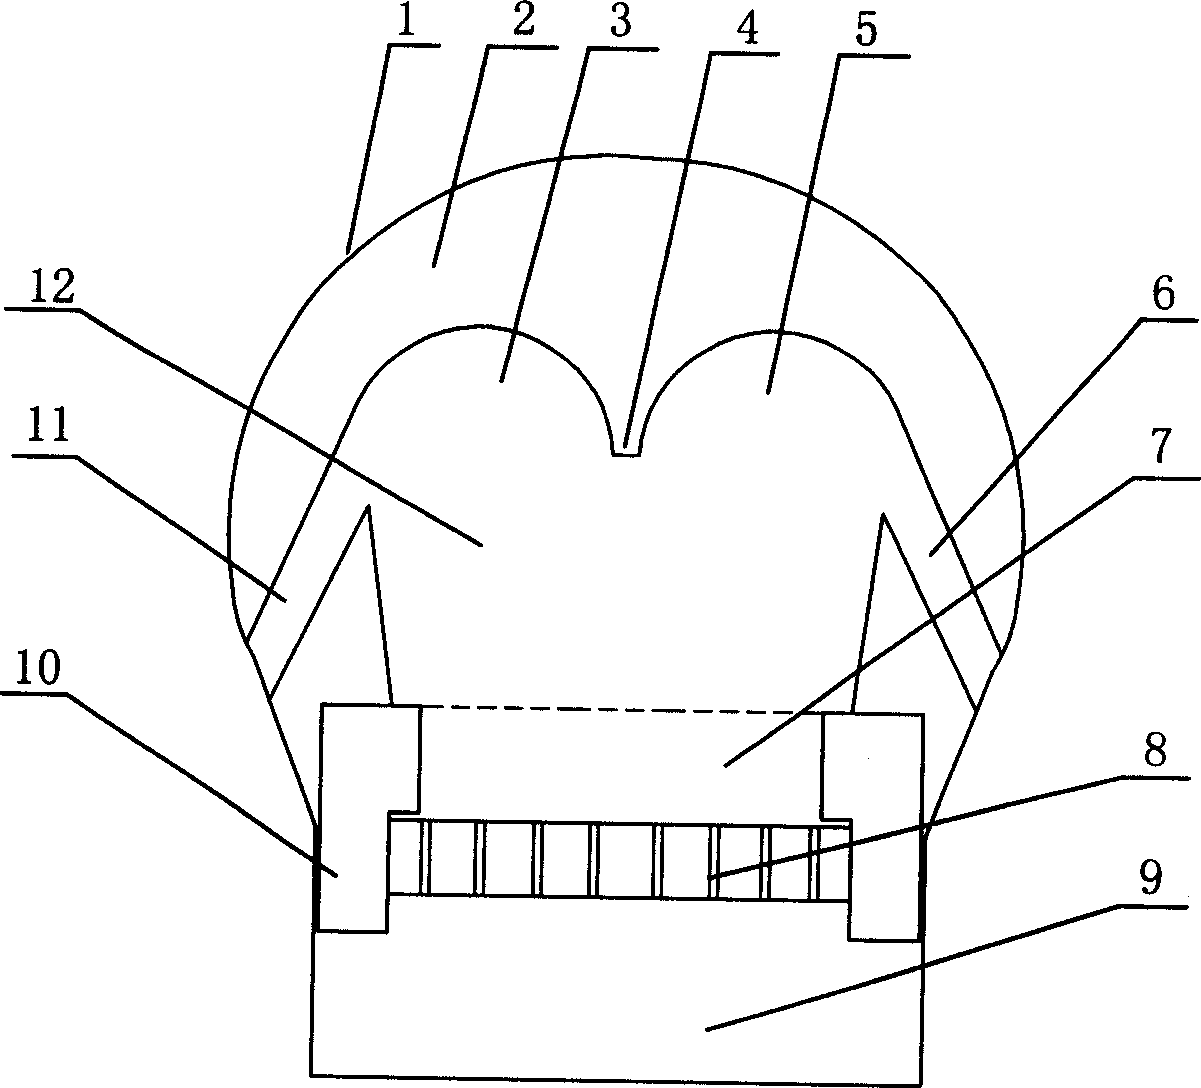 Double swirl-flow combustion apparatus for industrial boiler and kiln